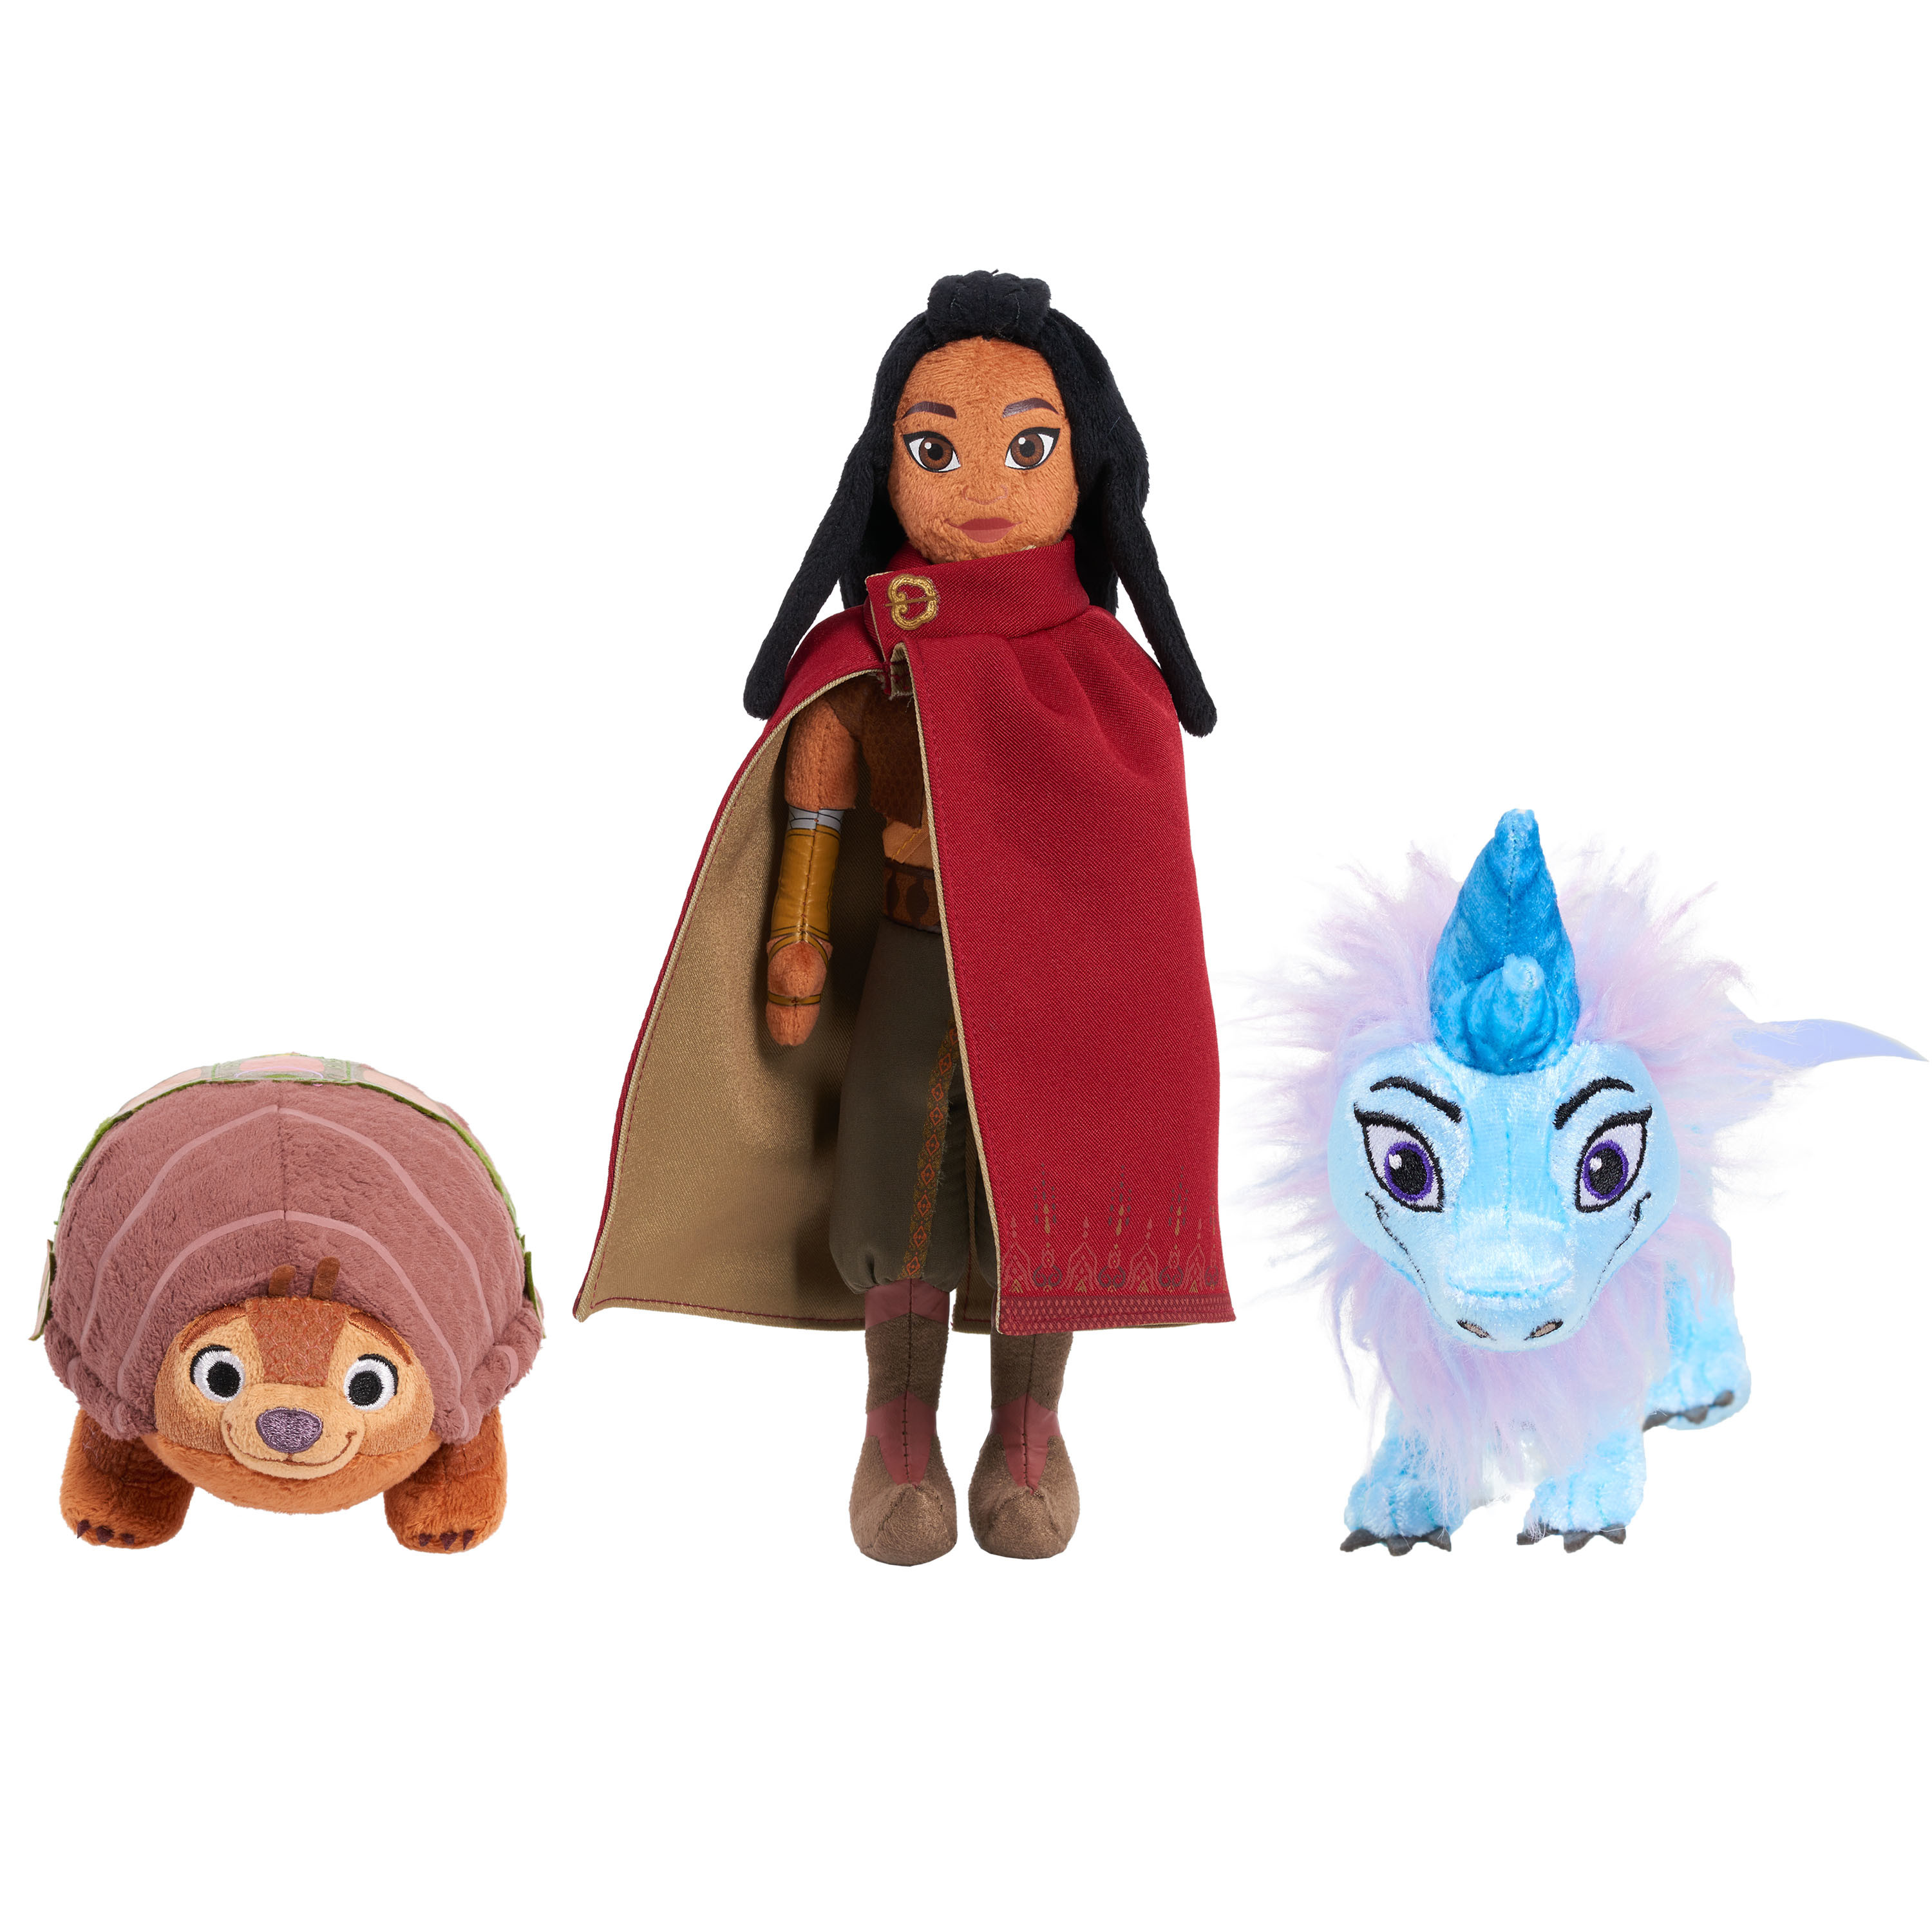 Disney Raya and the Last Dragon Small Plush Bundle Pack, Raya, Tuk Tuk, and Sisu, Officially Licensed Kids Toys for Ages 3 Up, Gifts and Presents - image 1 of 8